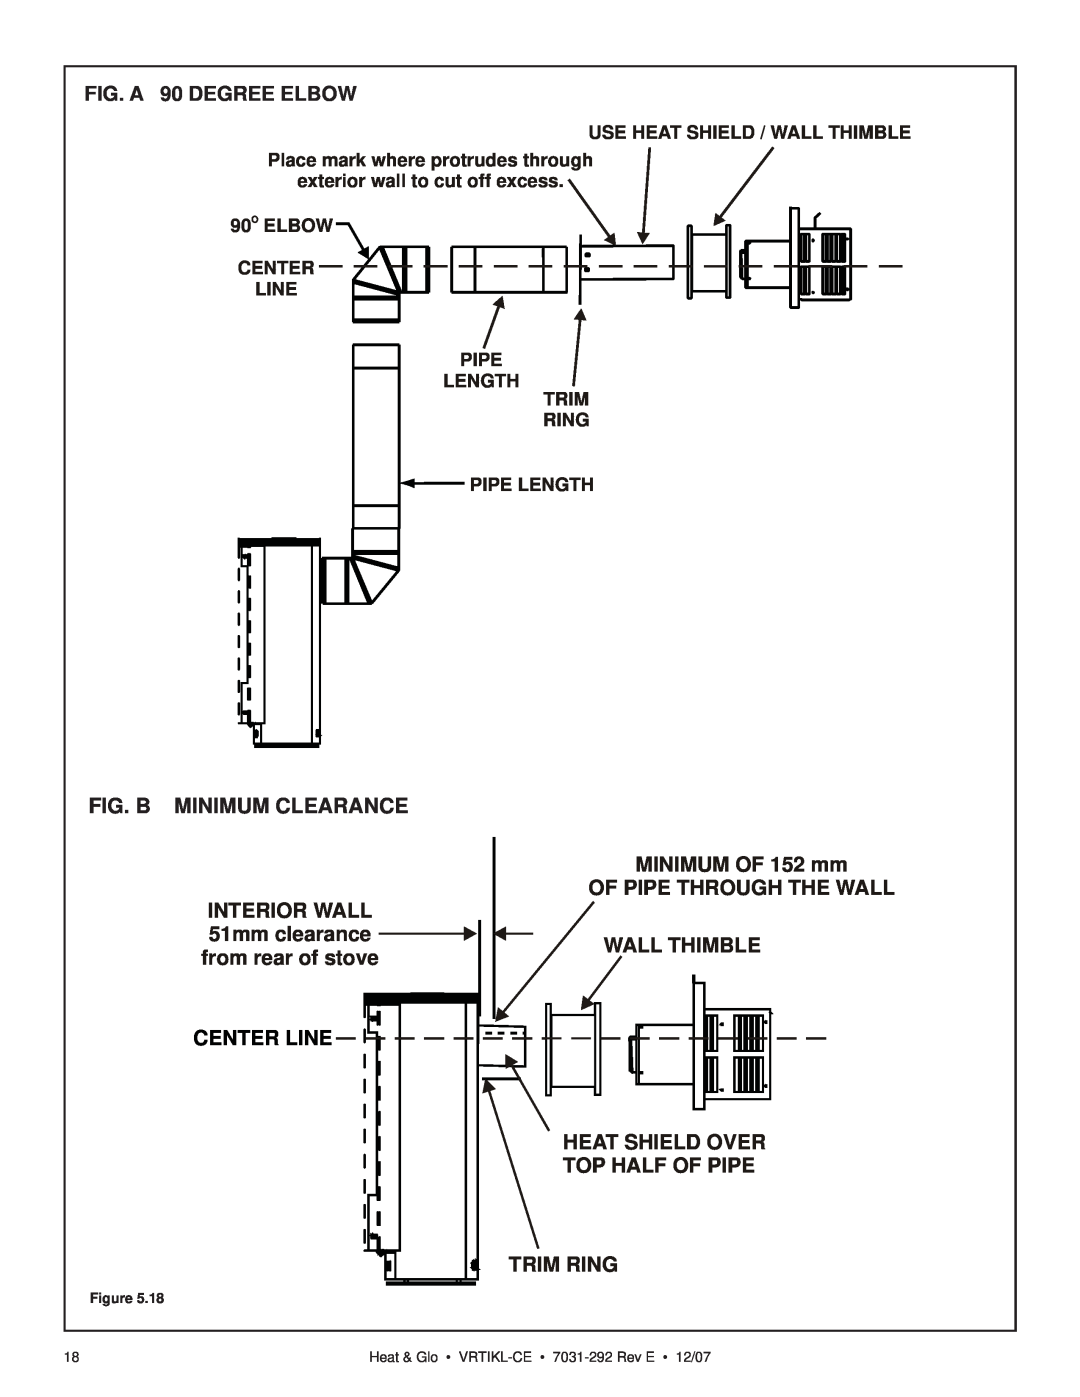 Hearth and Home Technologies VRT-GR-B-CE, VRTIKL-CE manual Fig. B Minimum Clearance, Center Line, FIG. A 90 DEGREE ELBOW 